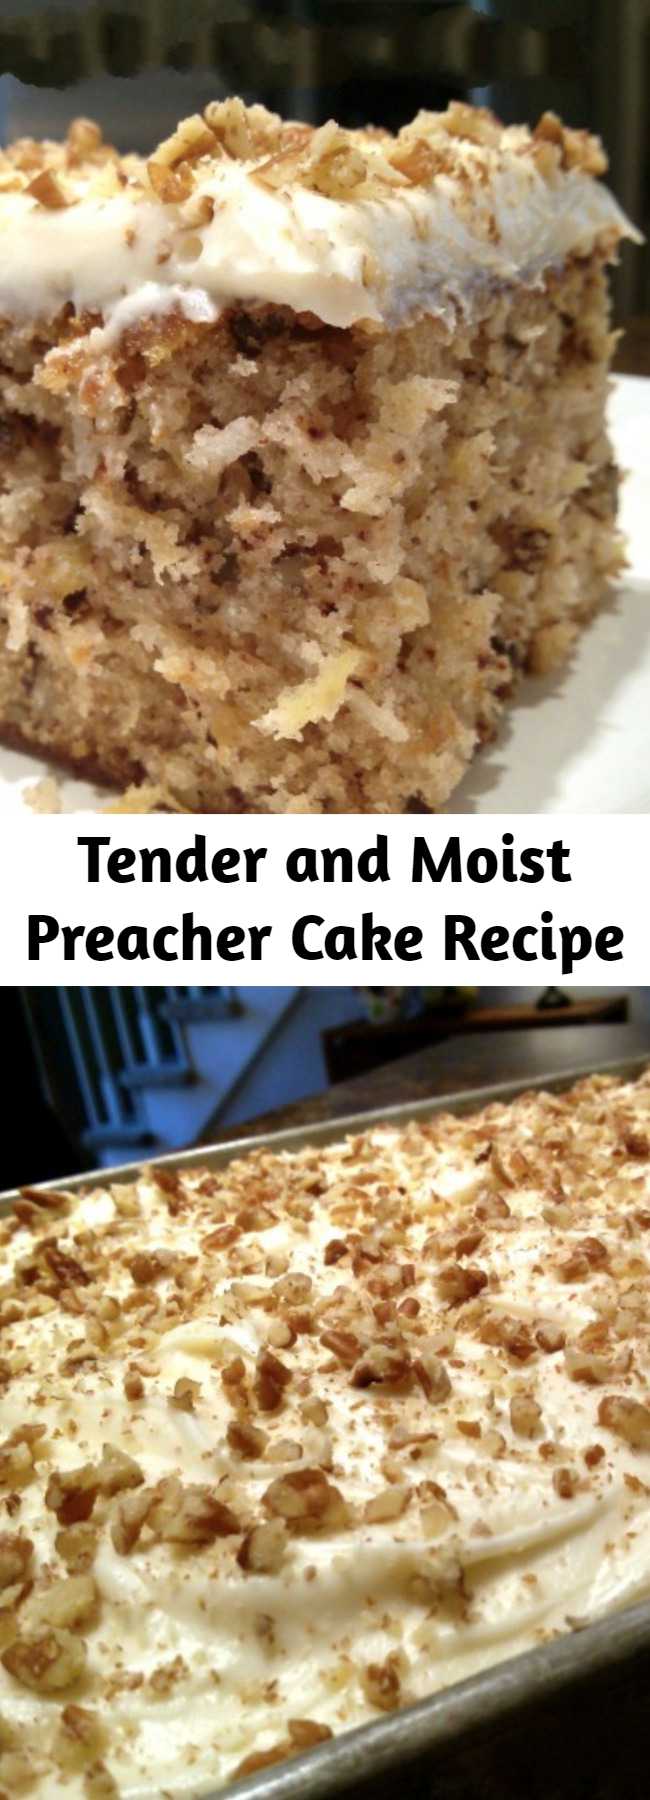 Tender and Moist Preacher Cake Recipe - Tender, moist cake recipe with crushed pineapple, pecans and coconut with a cream cheese frosting. An old Southern tradition to make this cake when the preacher comes by for a visit!